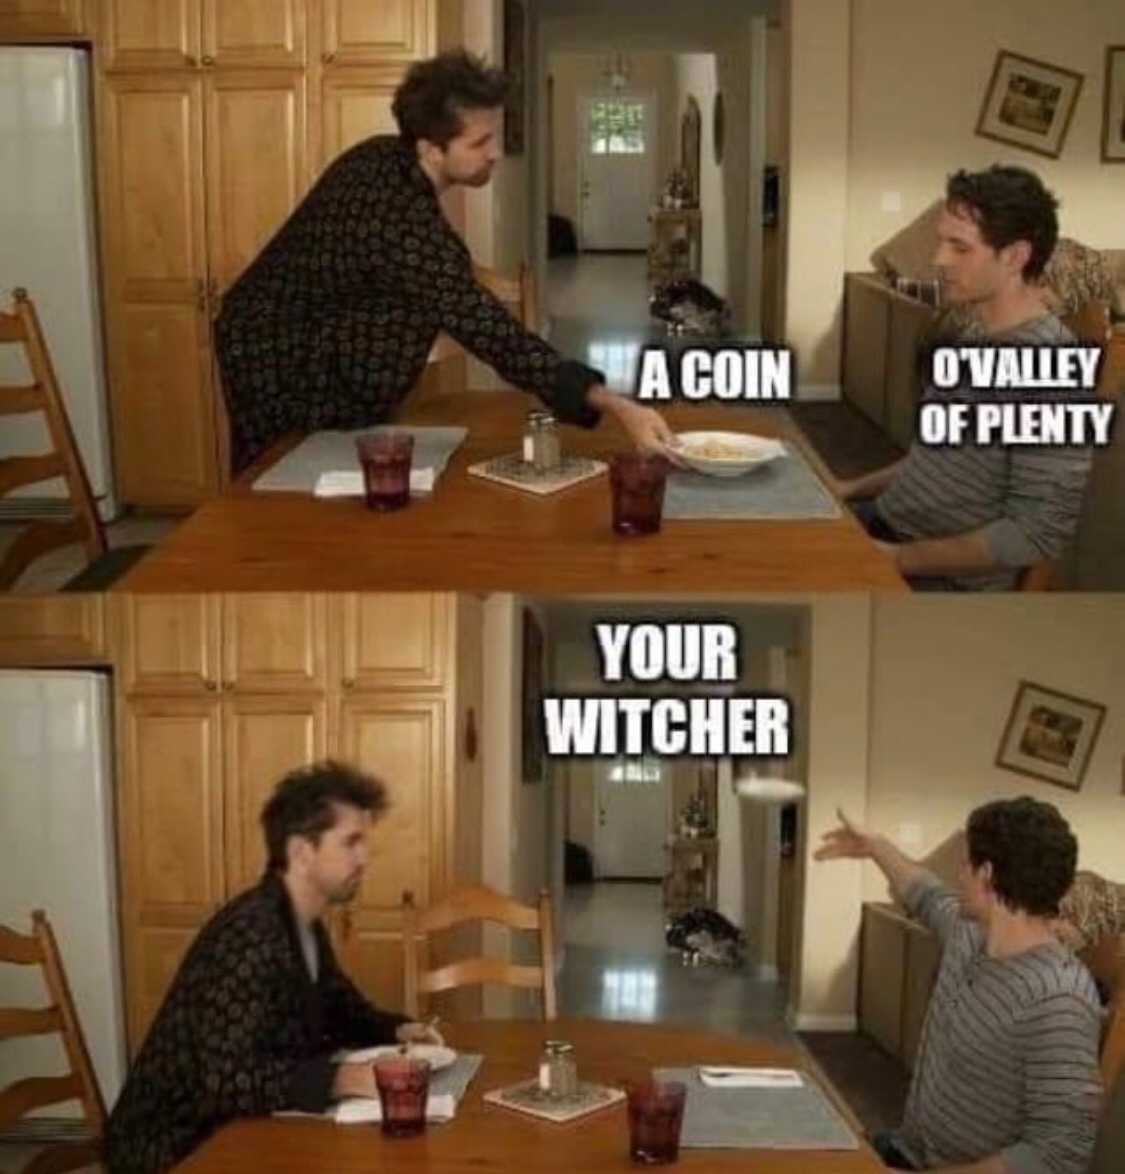 toss a coin to your Witcher o’valley of plenty - meme